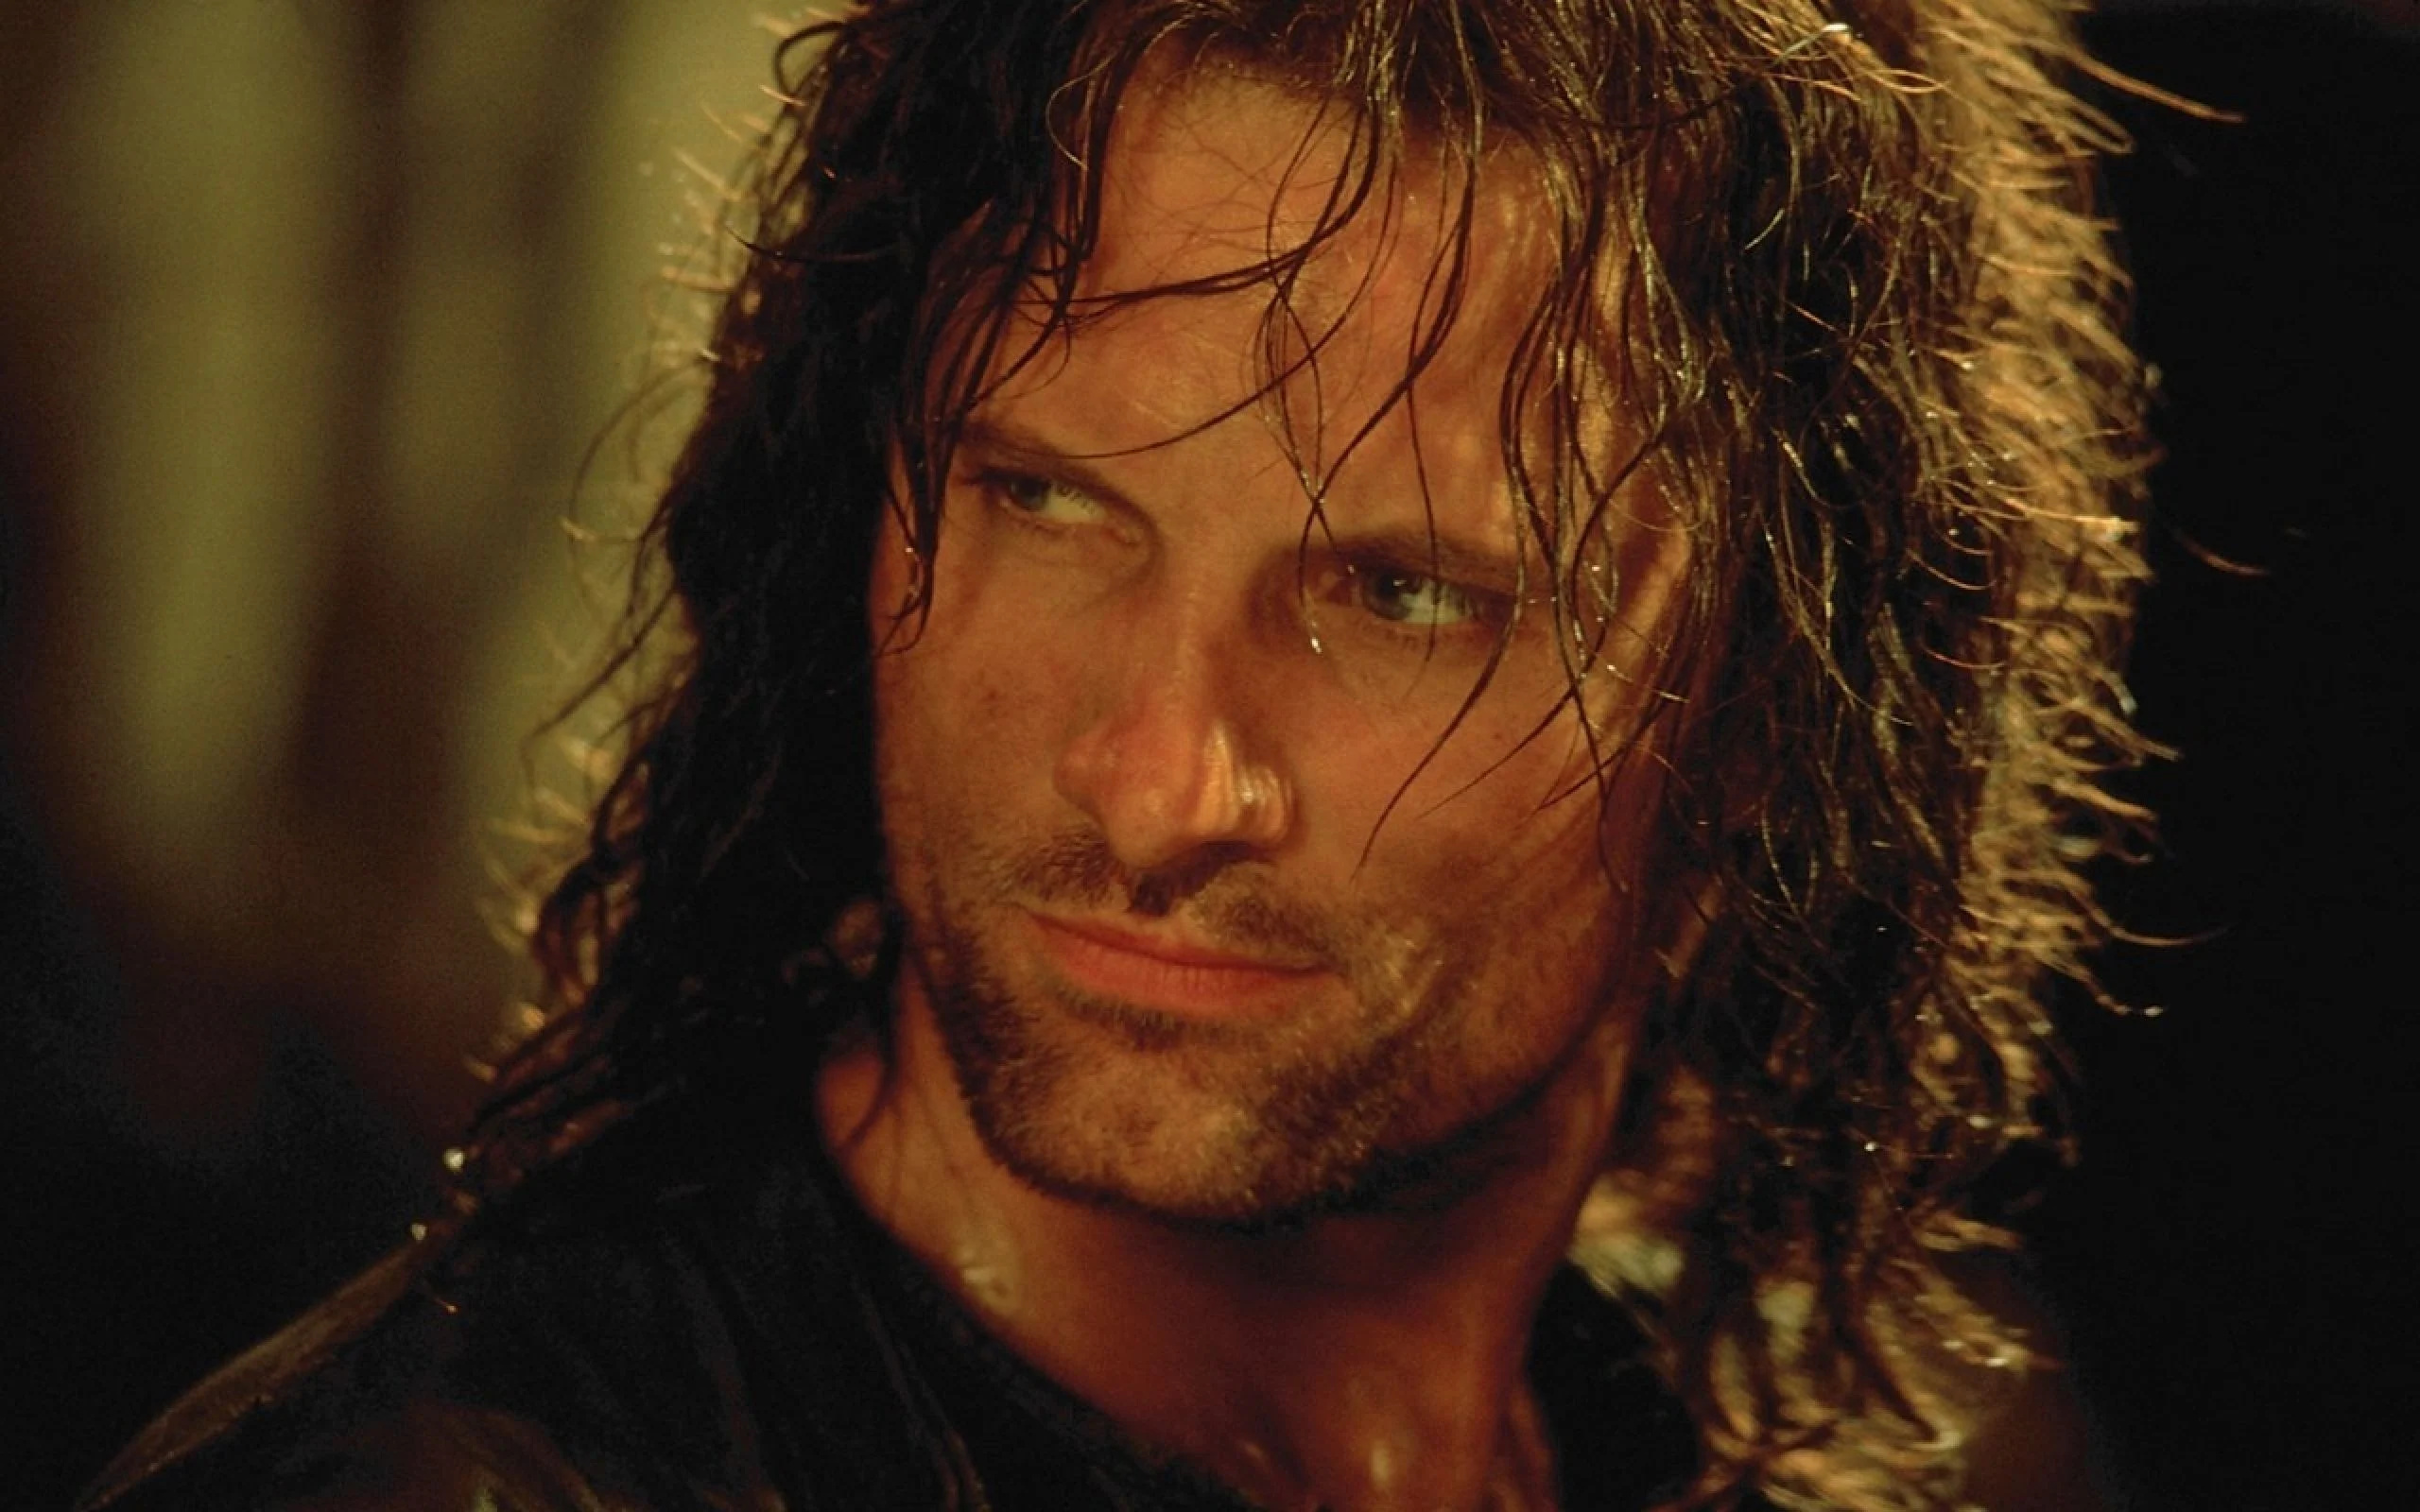 Lord of the Rings, Aragorn wallpapers, Heroic character, Free download, 2560x1600 HD Desktop